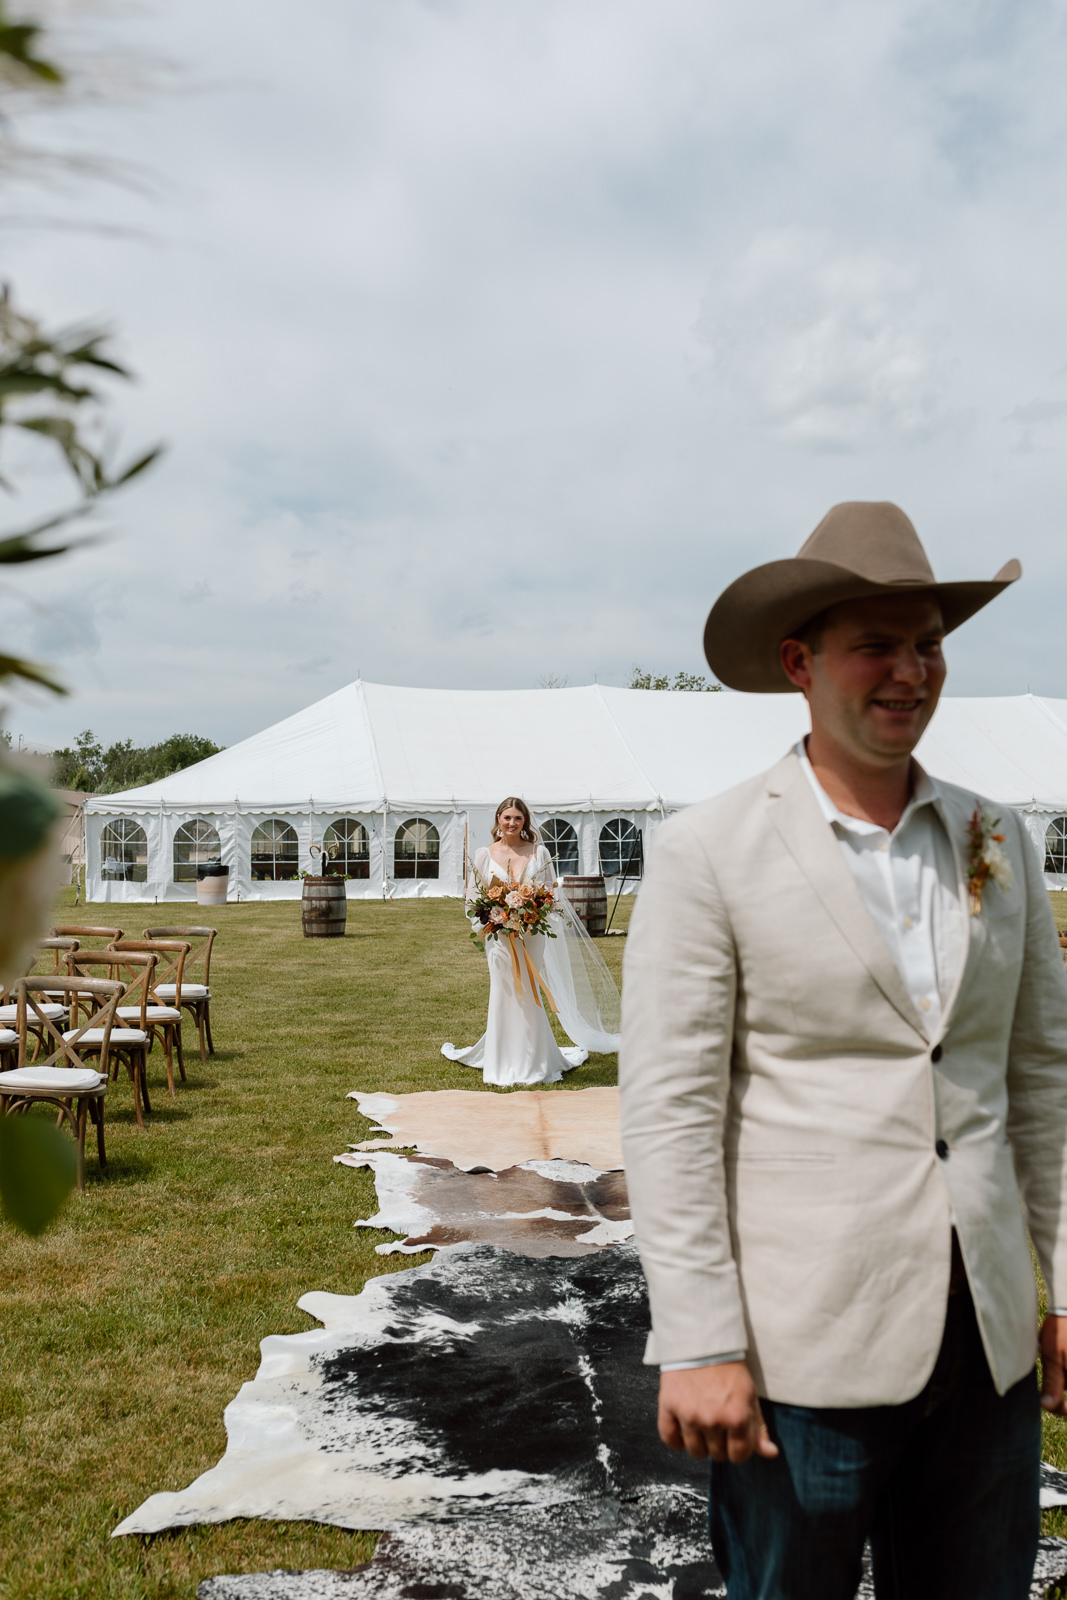 A country couple celebrating their rustic western wedding with their horses